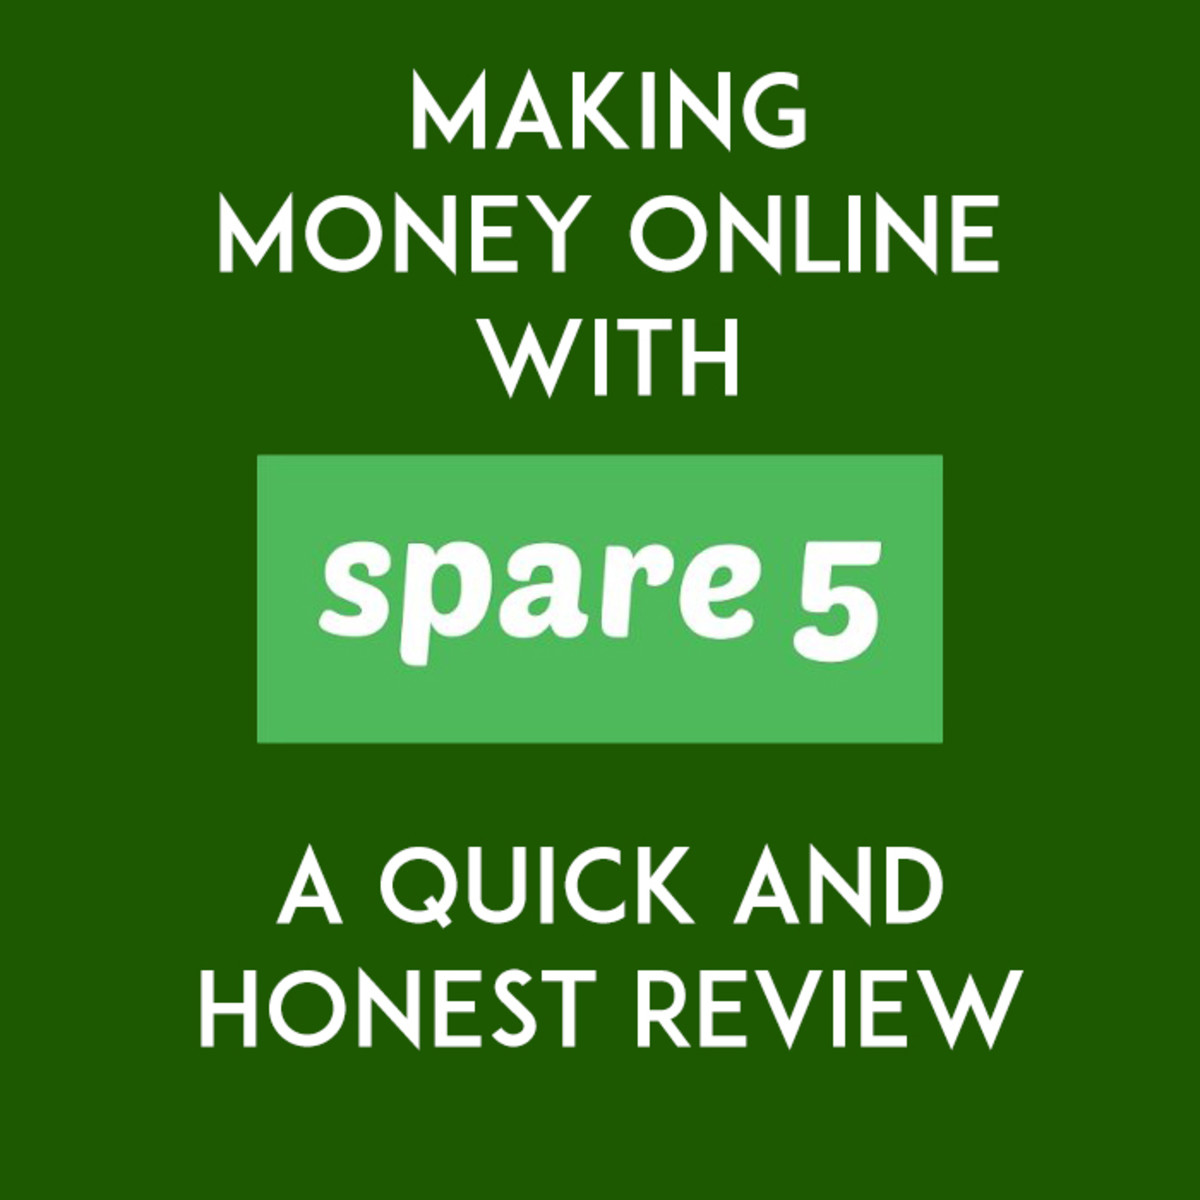 Is Spare 5 a good source of income? Find out!